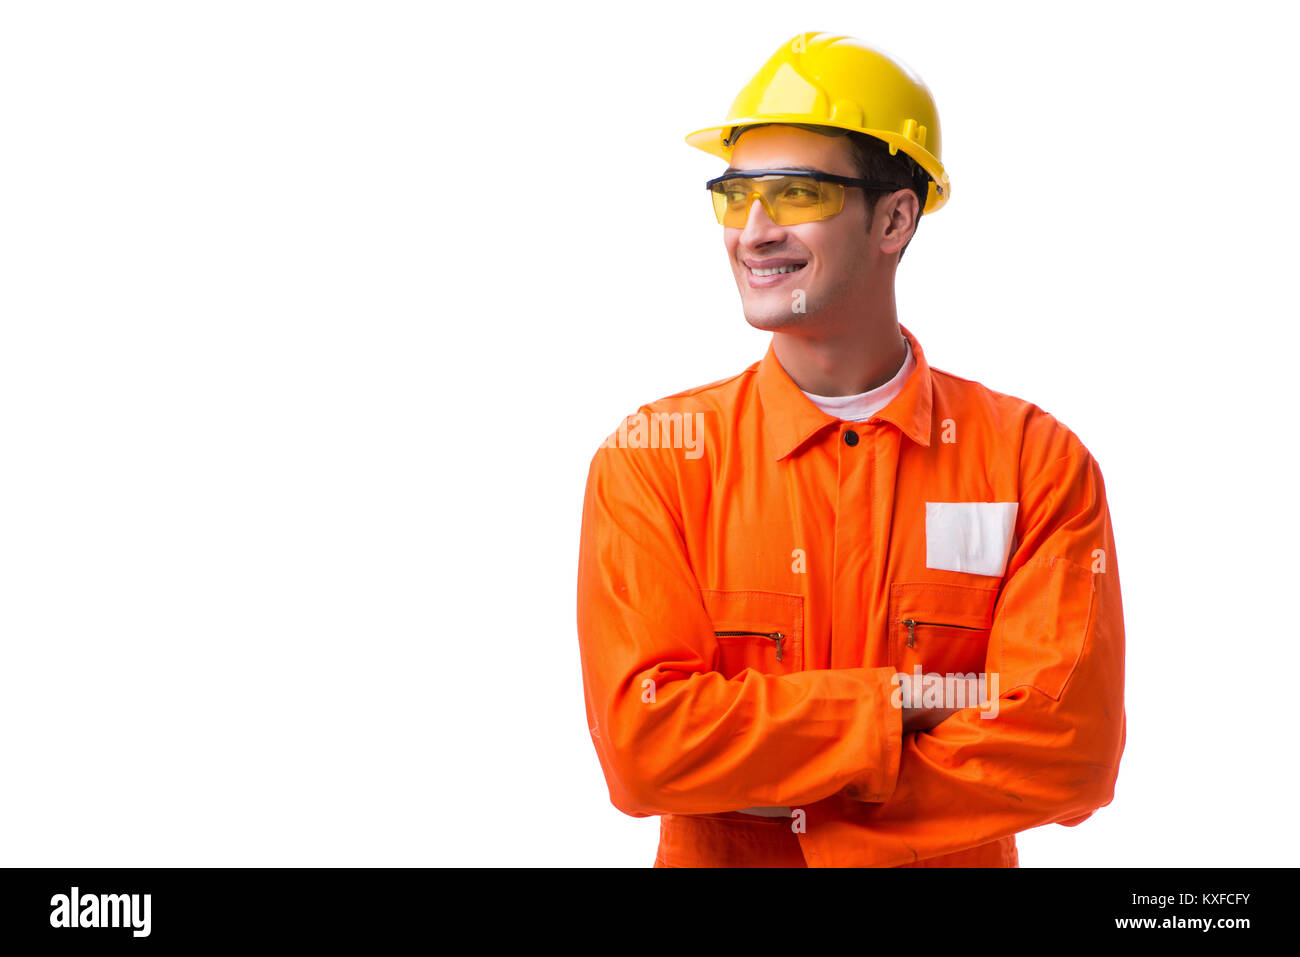 https://c8.alamy.com/comp/KXFCFY/construction-worker-wearing-hard-hat-isolated-on-white-KXFCFY.jpg